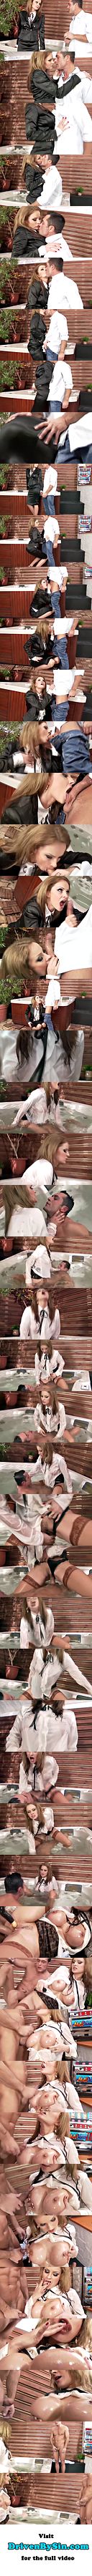 CFNM wet and messy Abbie Cat loves rough anal in jacuzzi